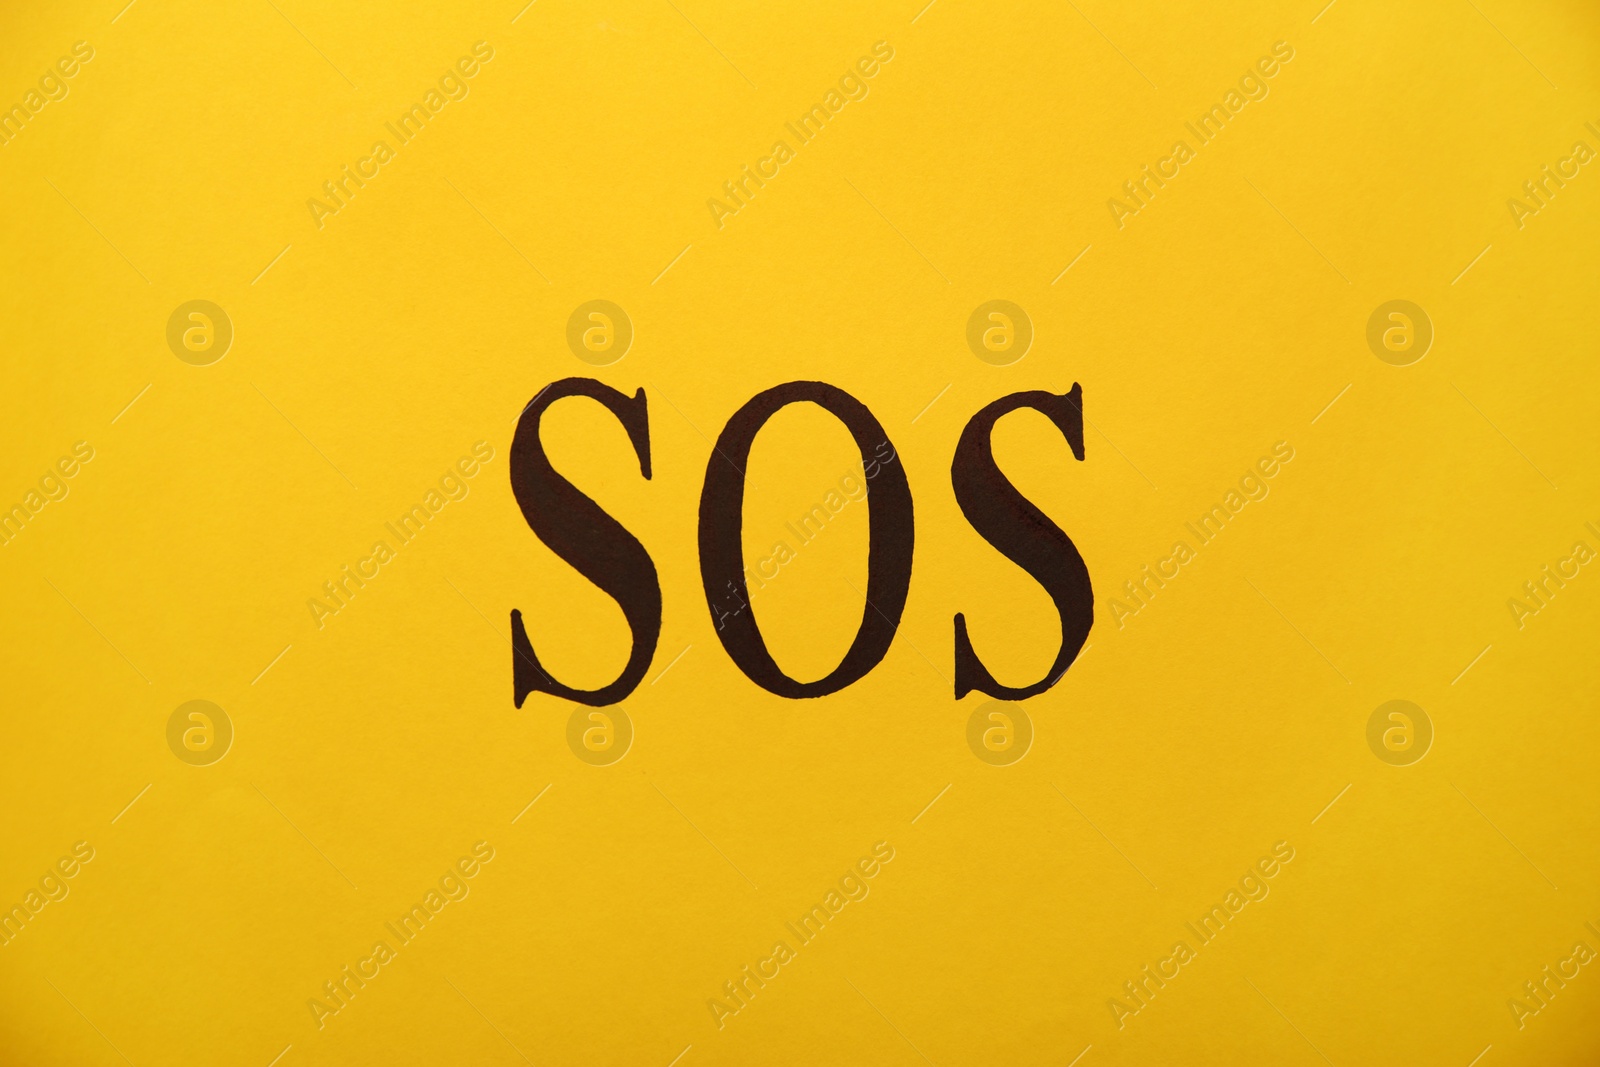 Photo of Abbreviation SOS (Save Our Souls) written on yellow background, top view